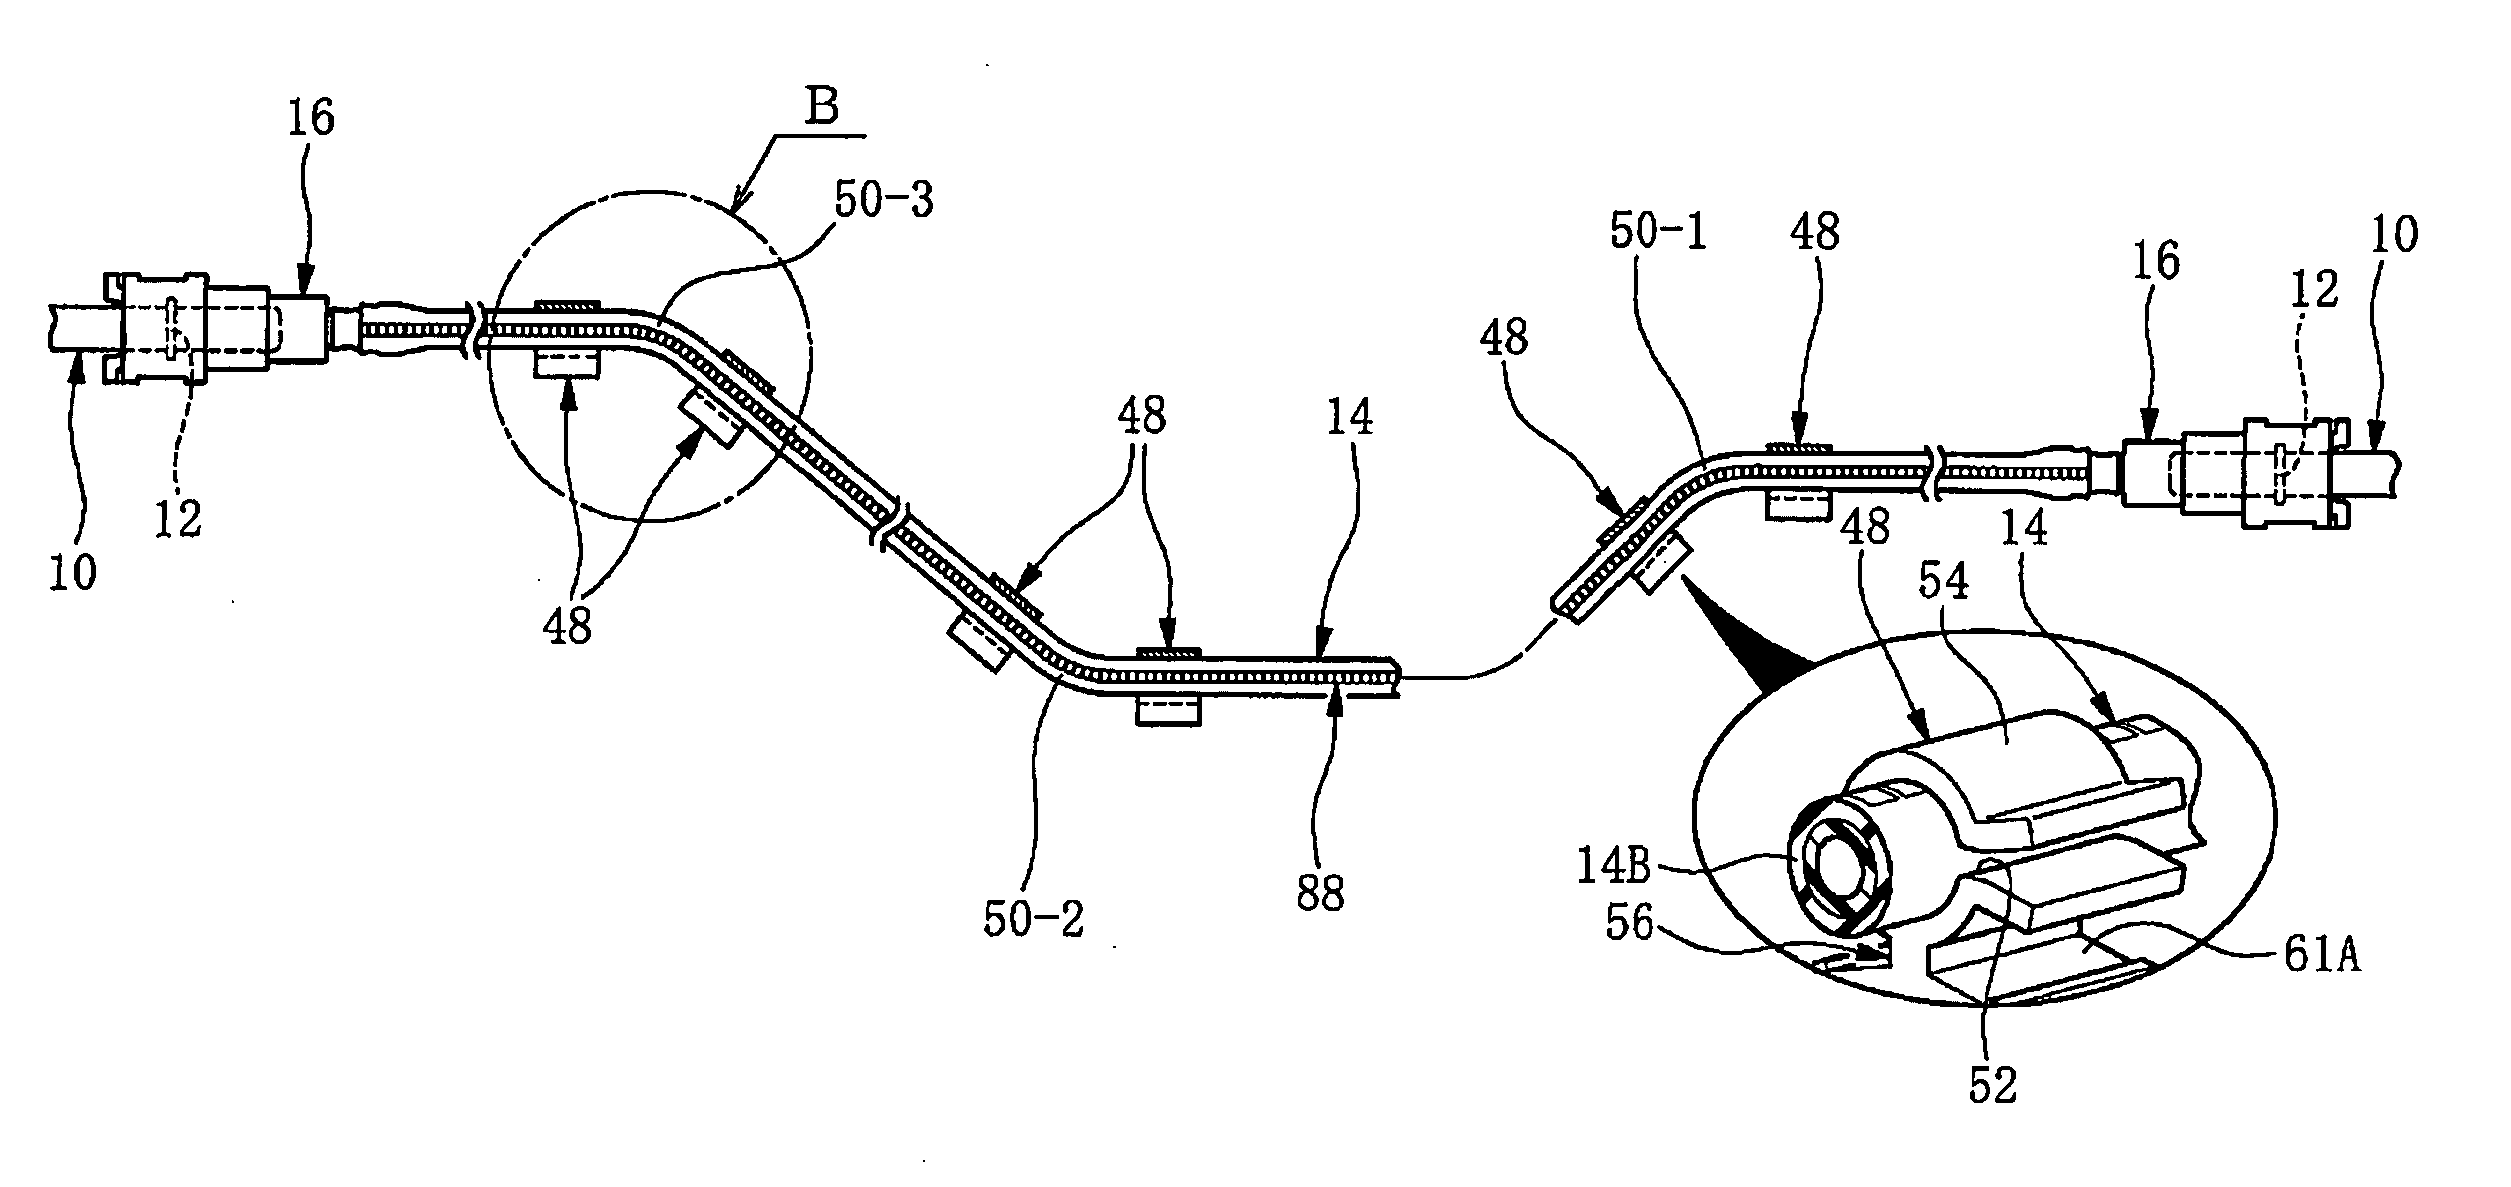 Piping structure for transporting a fuel